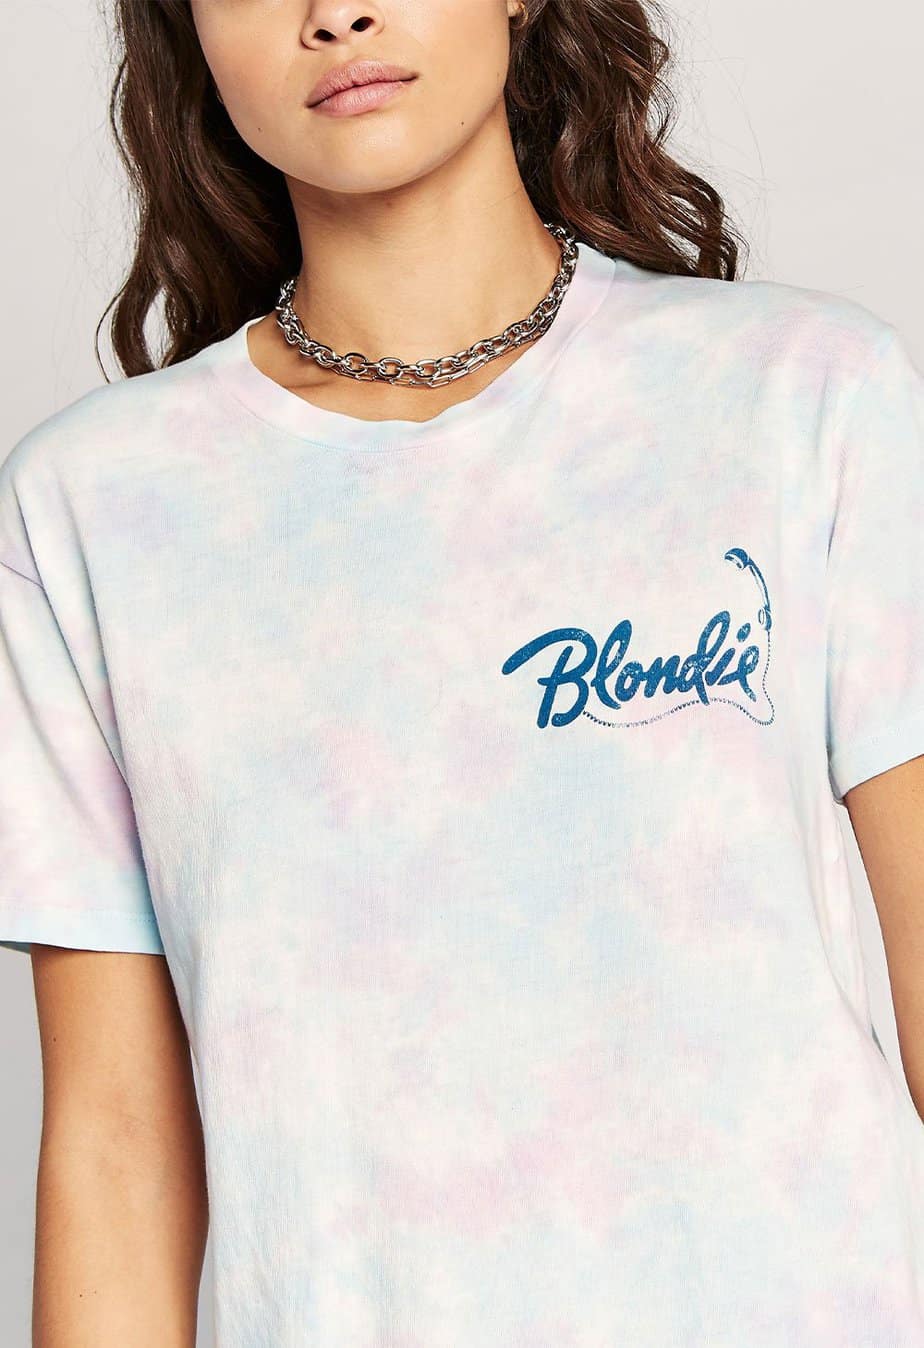 DAYDREAMER Blondie Call Me Tee | Cotton Island Women's Clothing Boutique